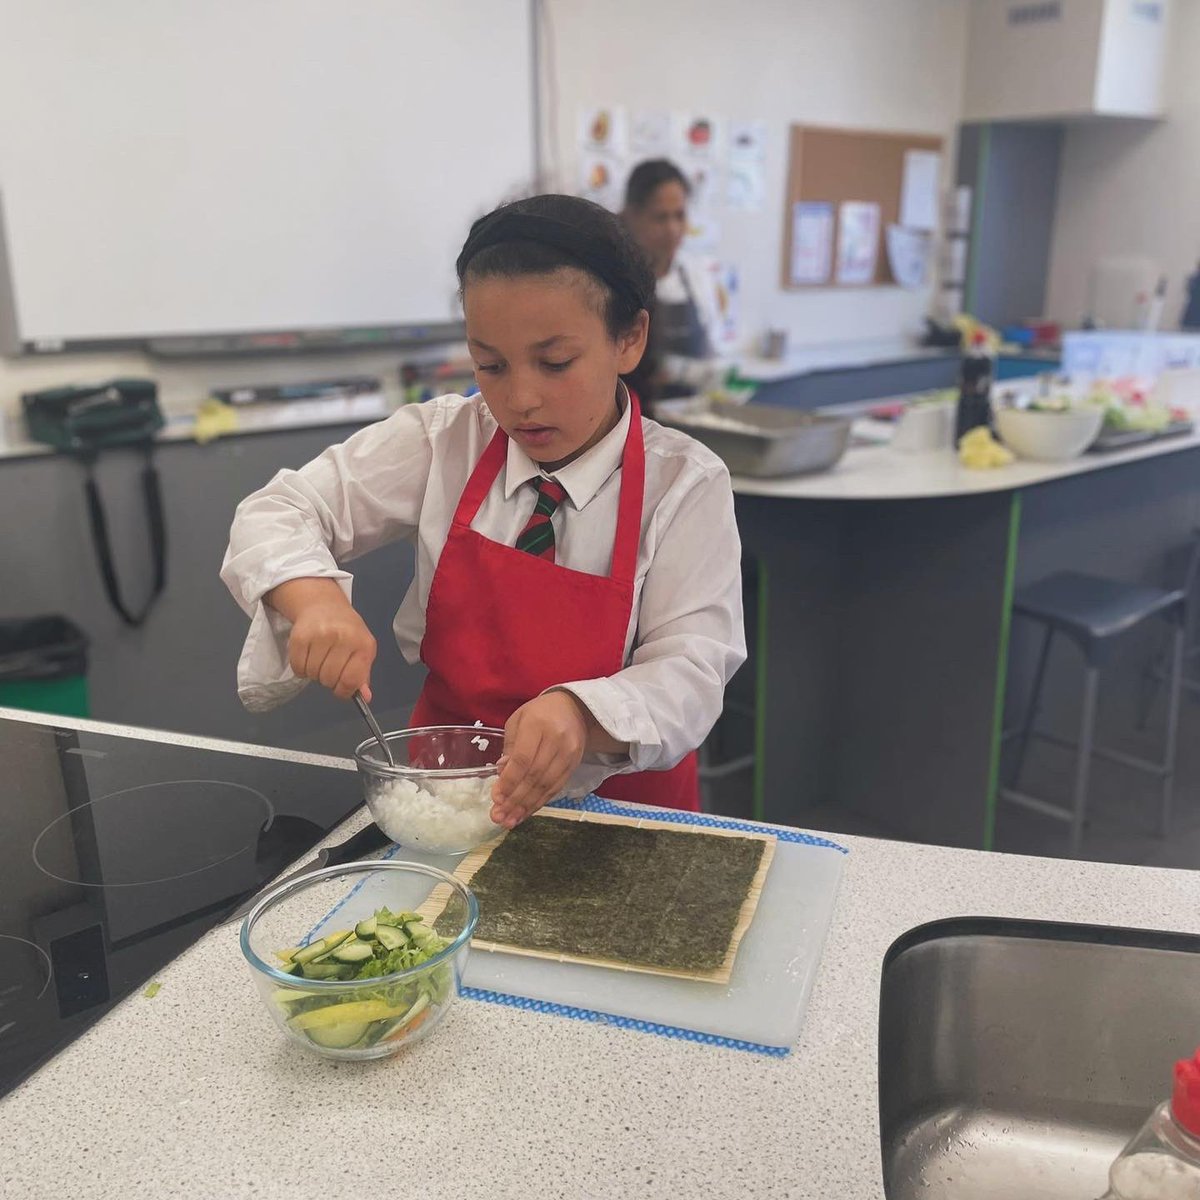 🍣 Our Year 6 pupils had an incredible time diving into the world of sushi making with @Thomas_Franks_ cooking workshop! From rolling techniques to mastering flavours, they had an absolute blast and picked up loads of new skills along the way! #SushiWorkshop #HallfieldEnrichment…